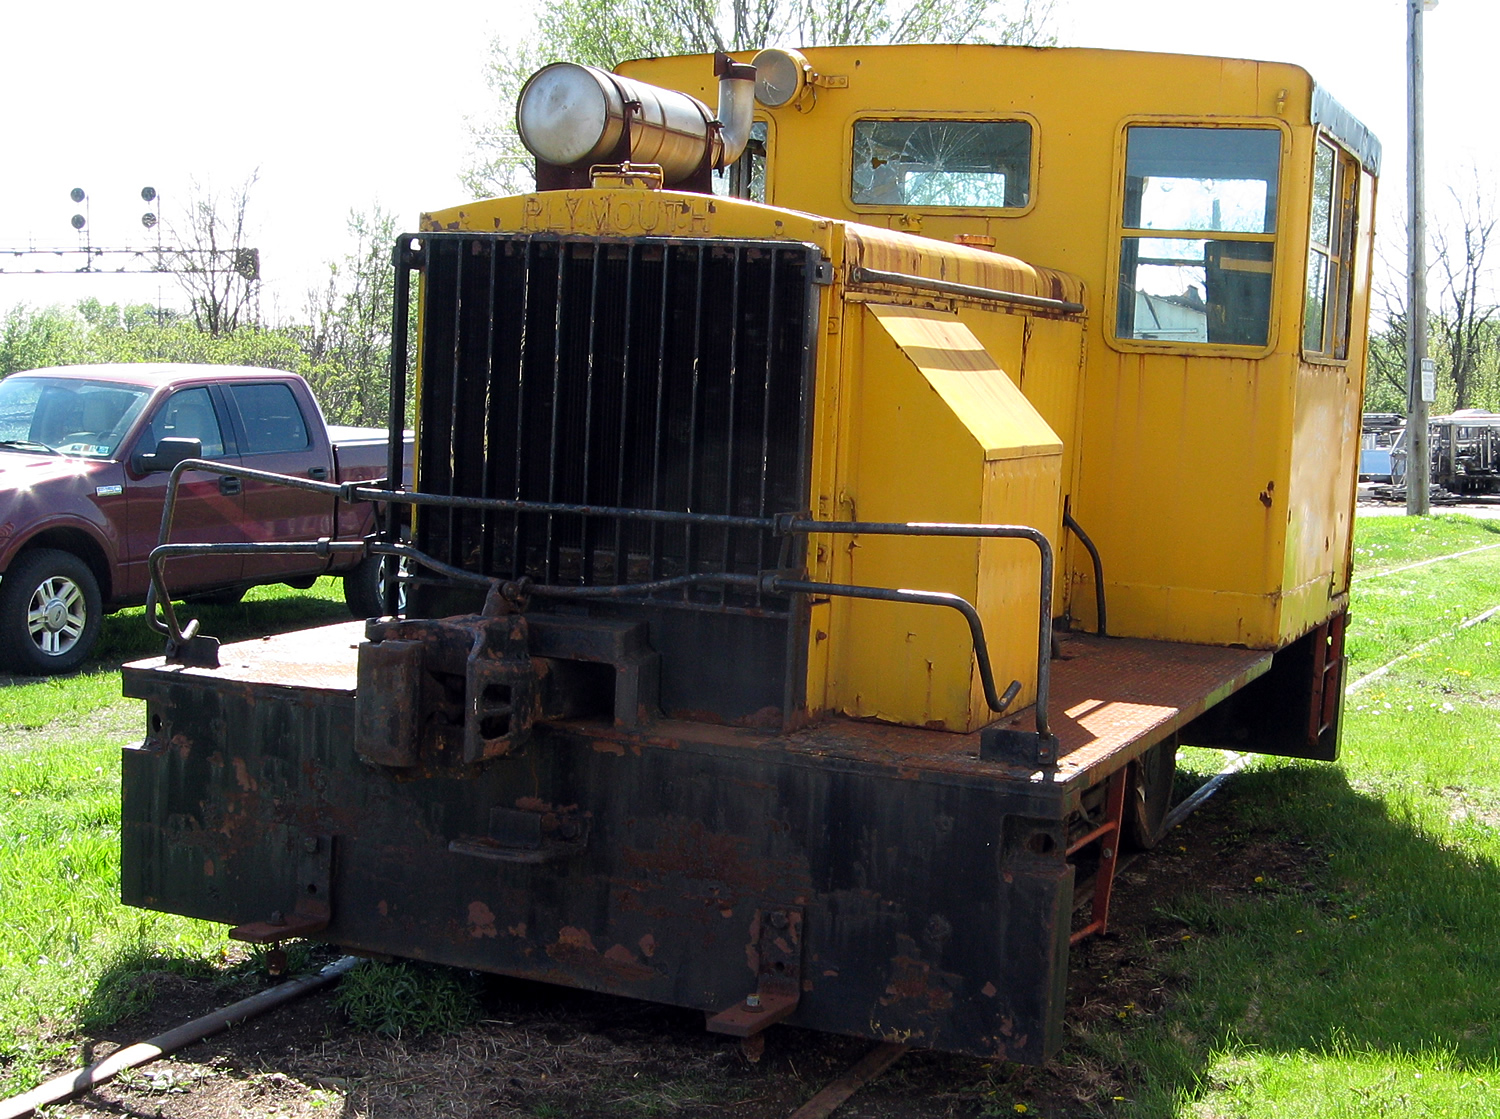 Plymouth JHG arrives at Lake Shore Railway Museum